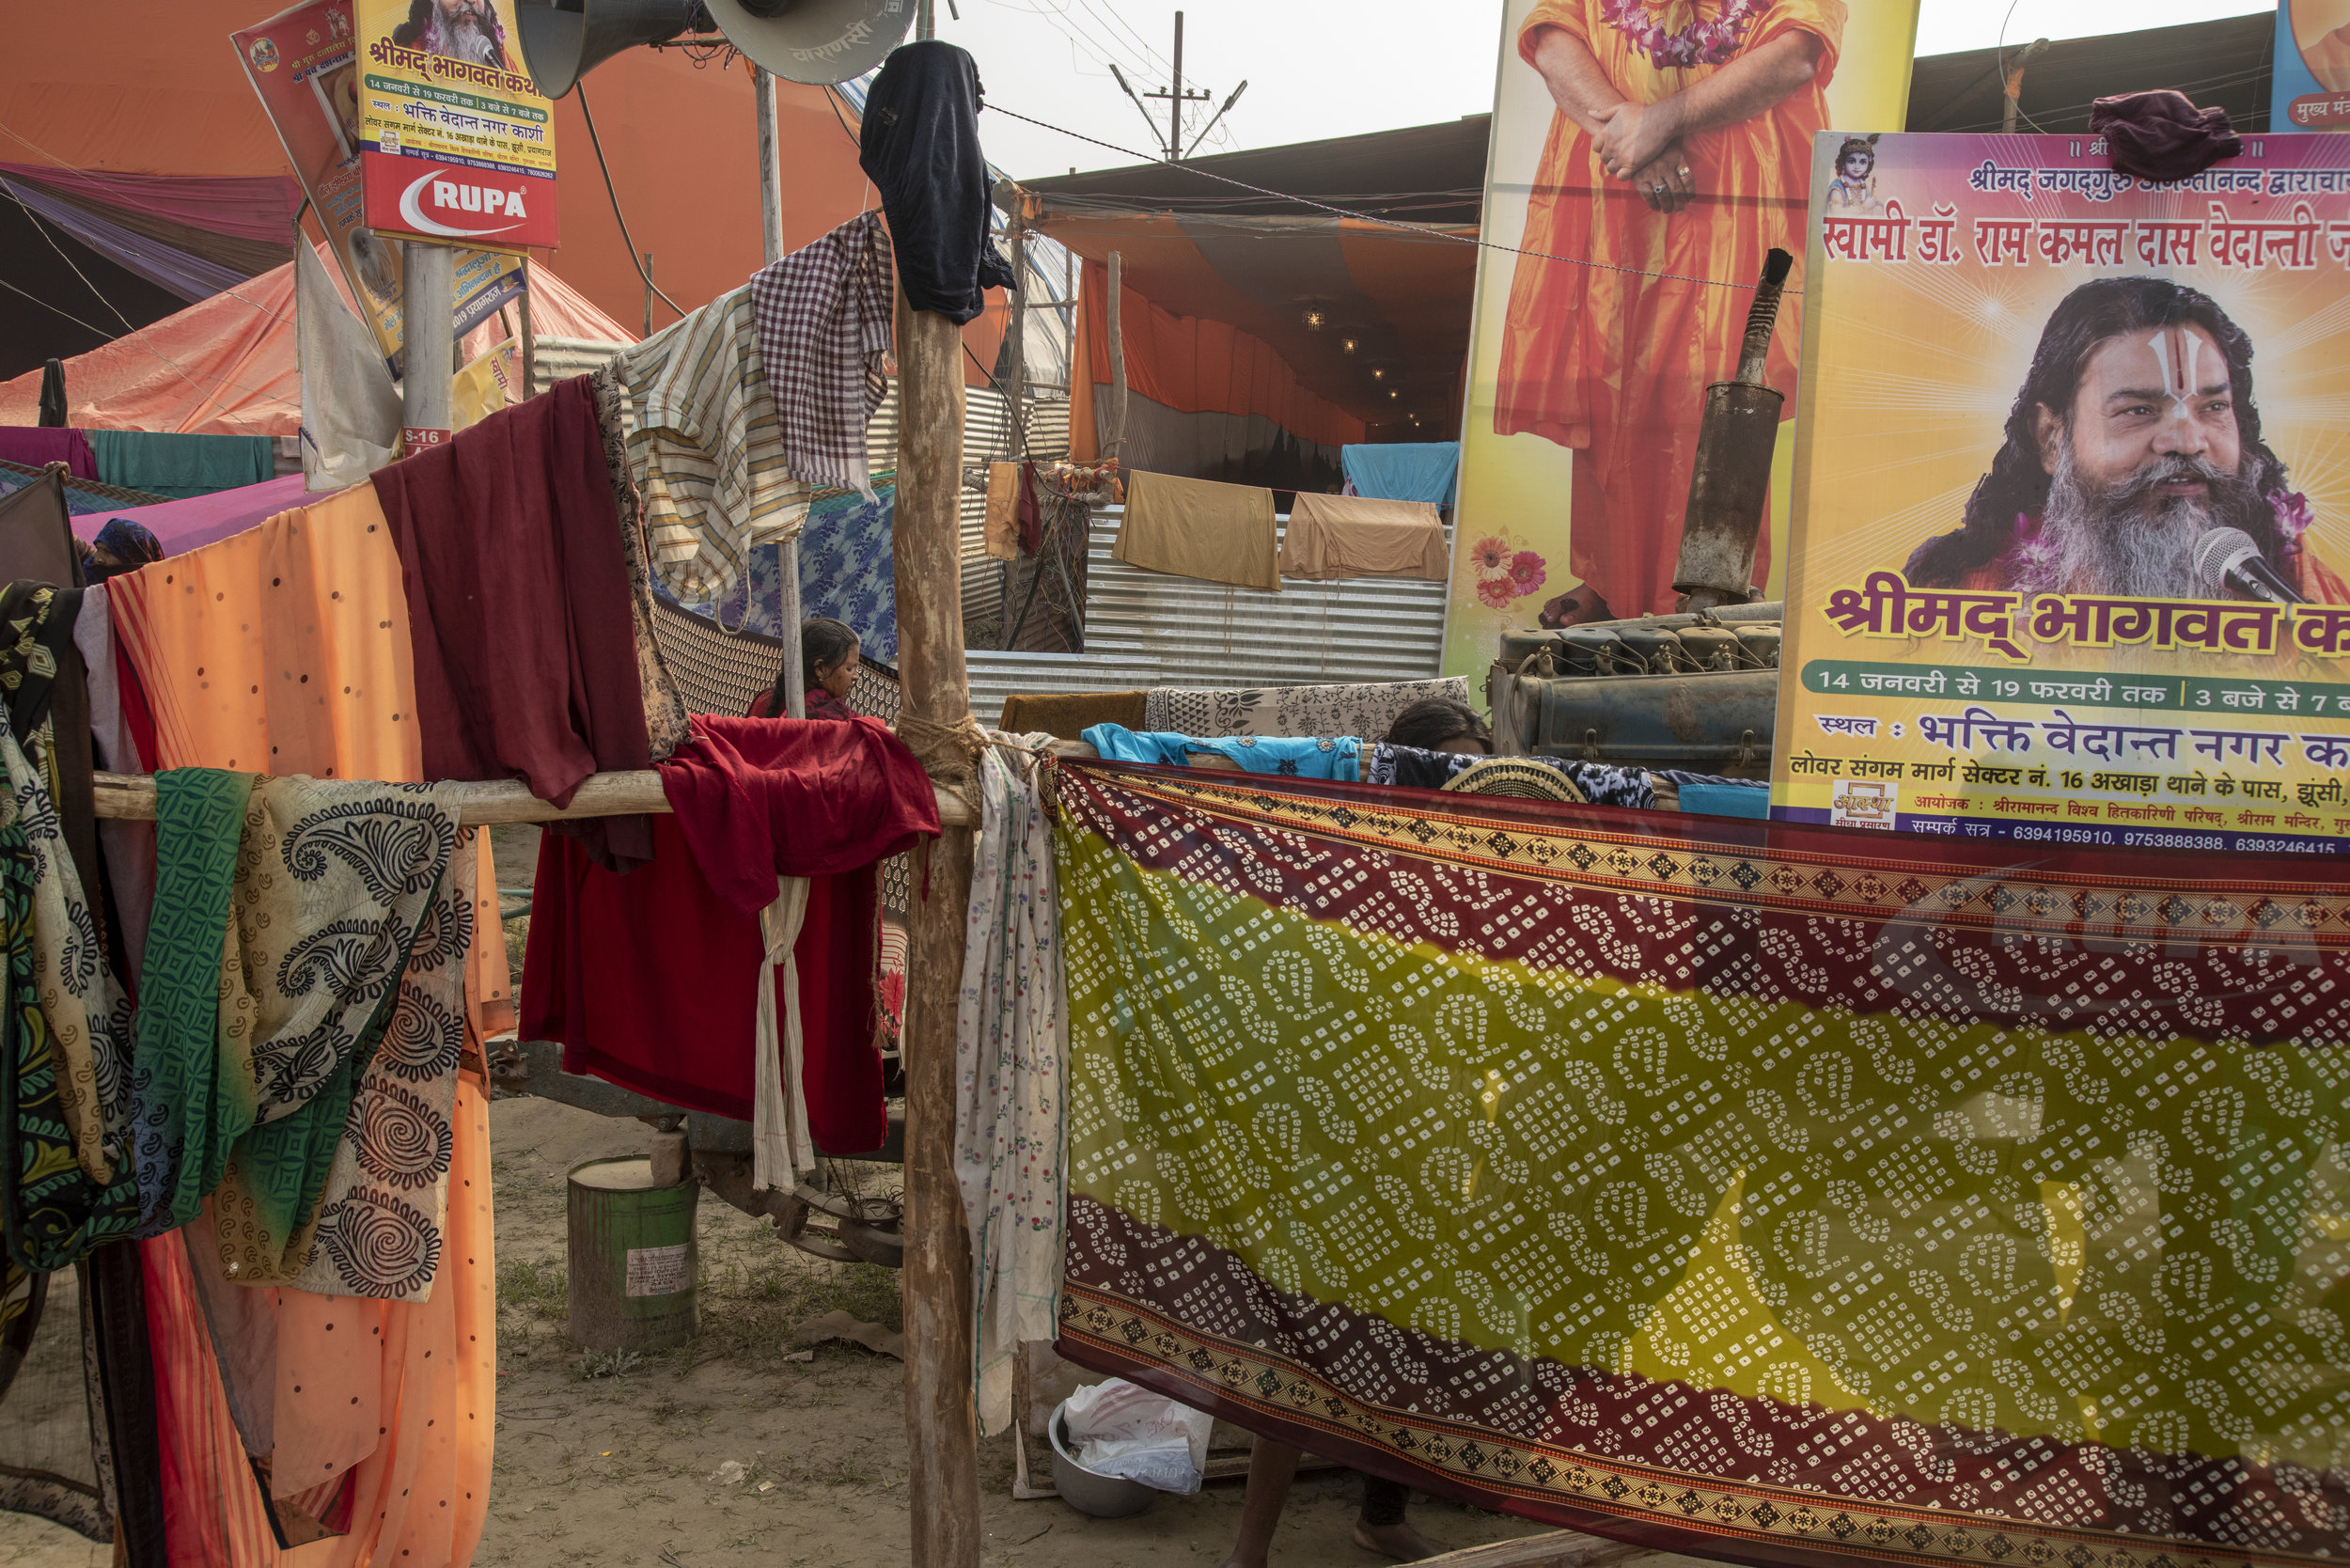  A maze of sarees and clothes dry in the sun 